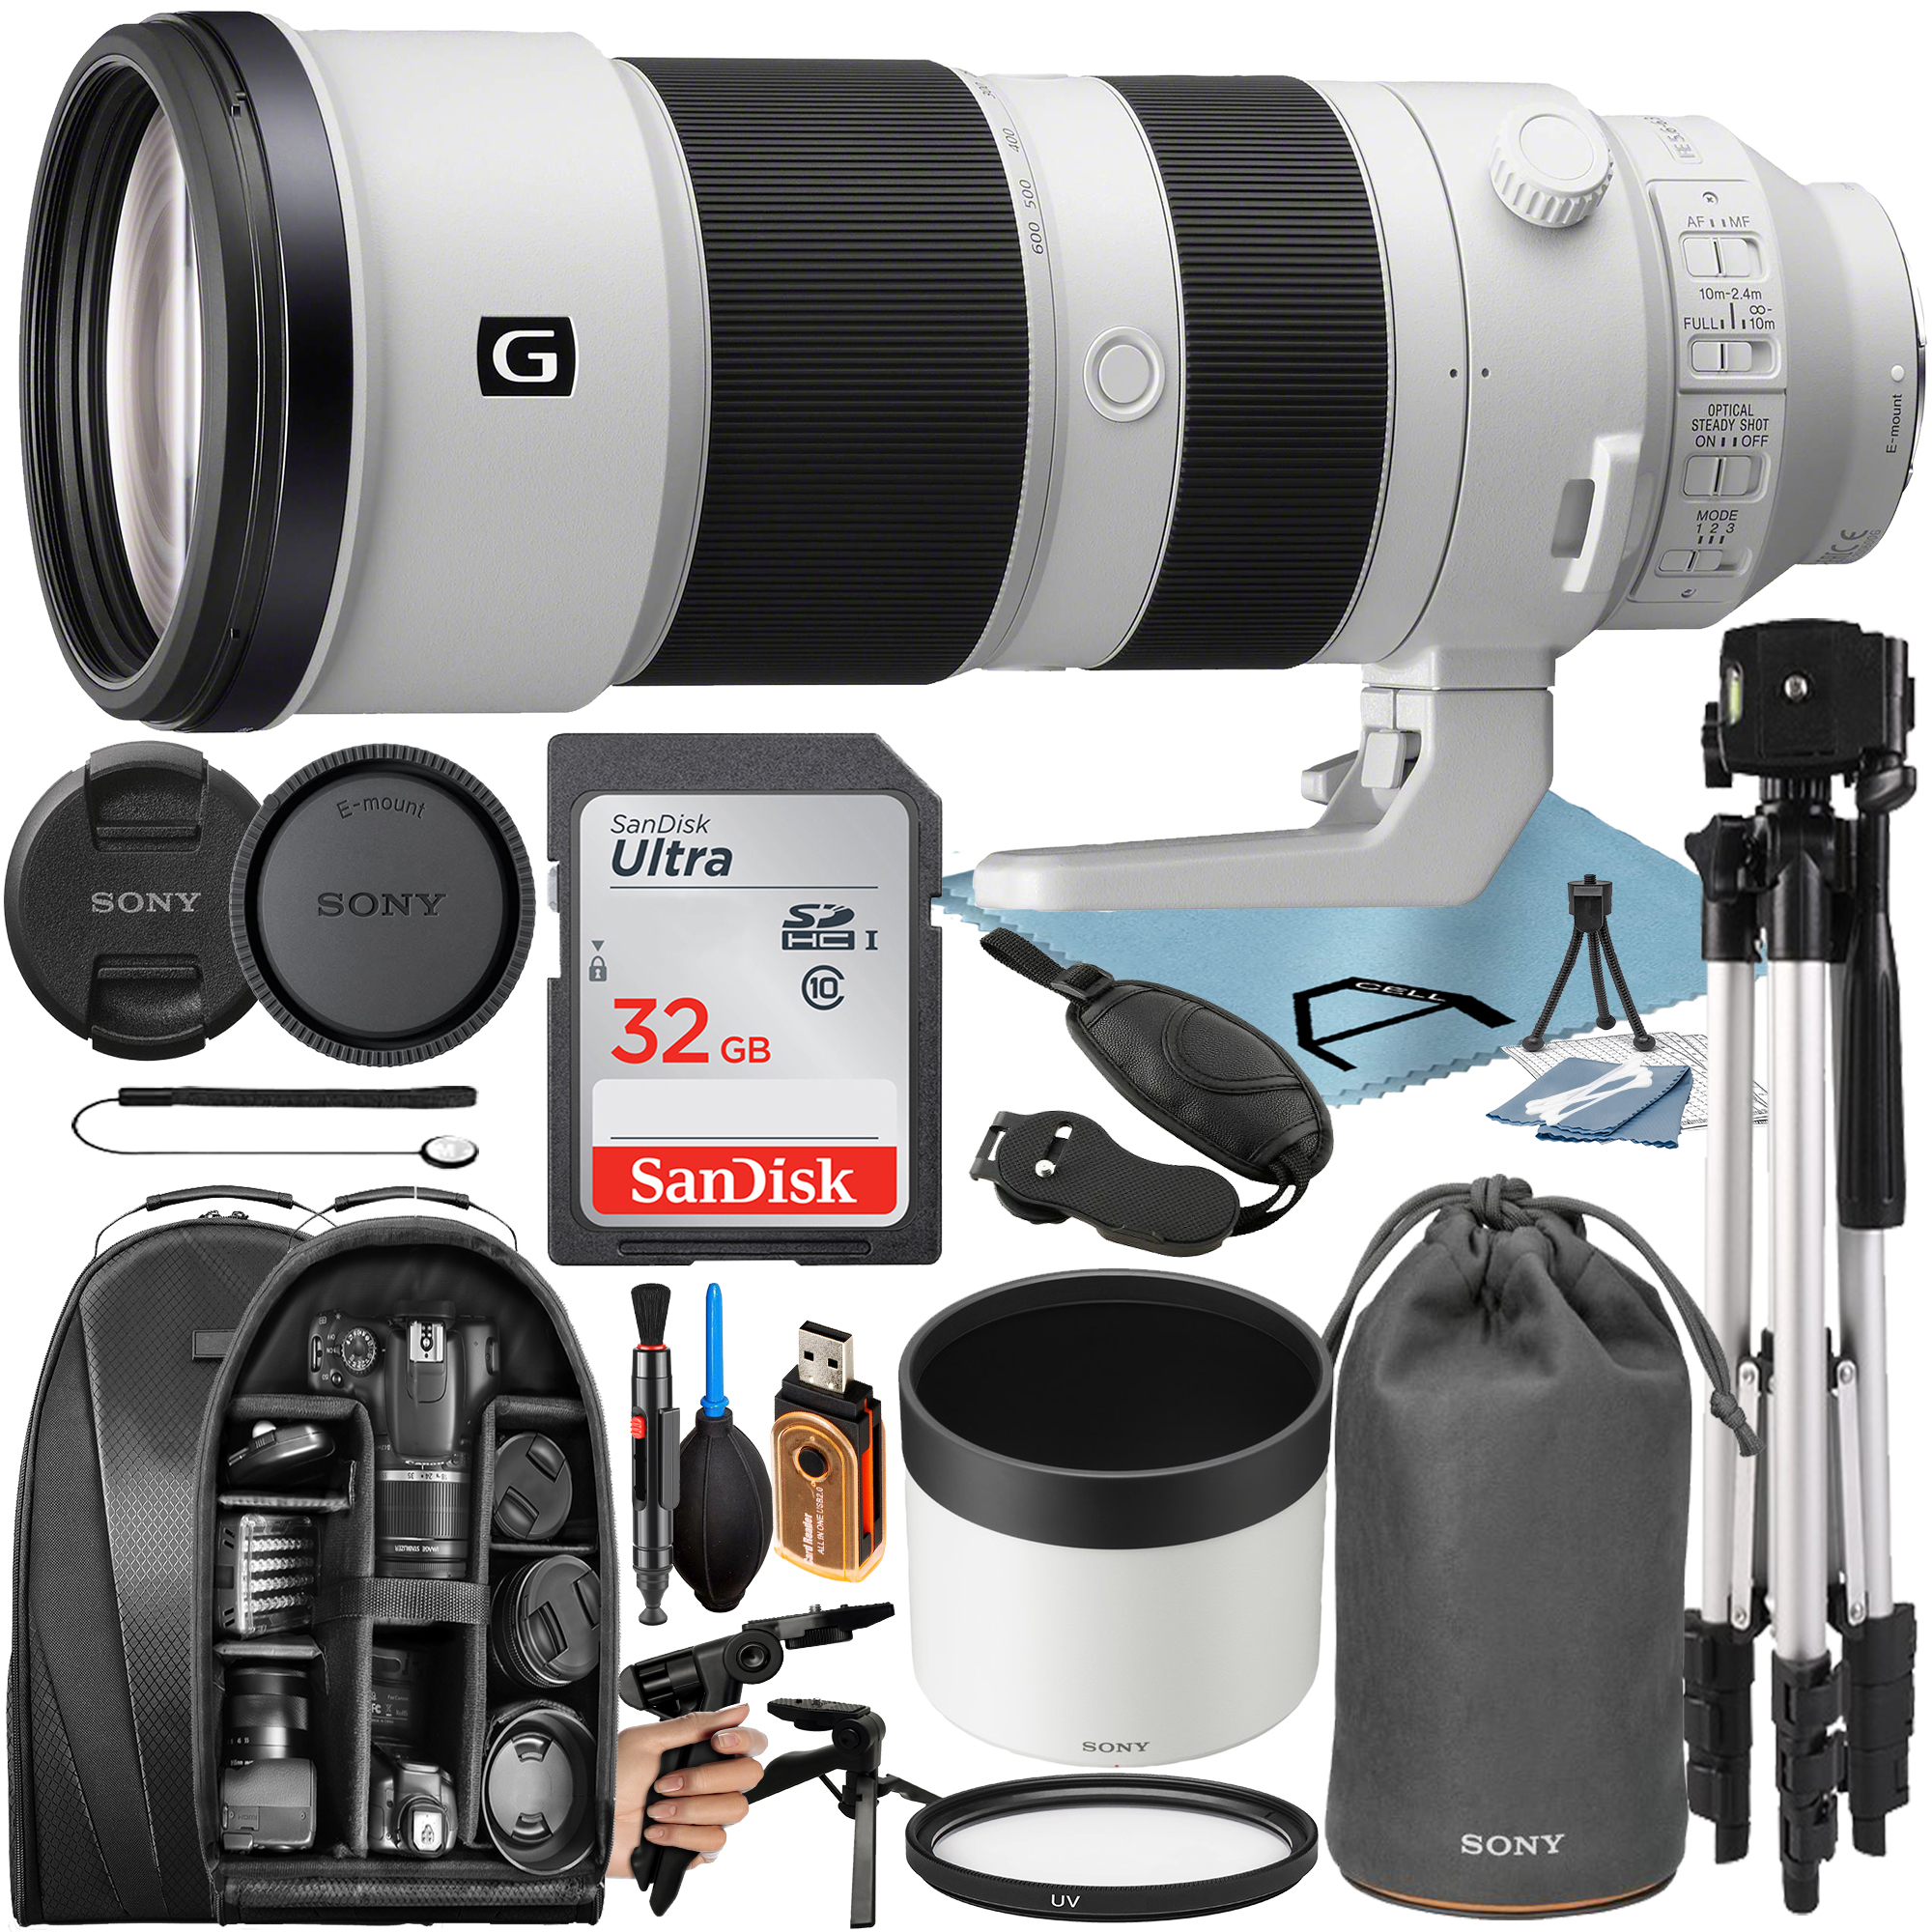 Sony FE 200-600mm f/5.6-6.3 G OSS Lens with 32GB SanDisk Memory Card + Tripod + Backpack + A-Cell Accessory Bundle